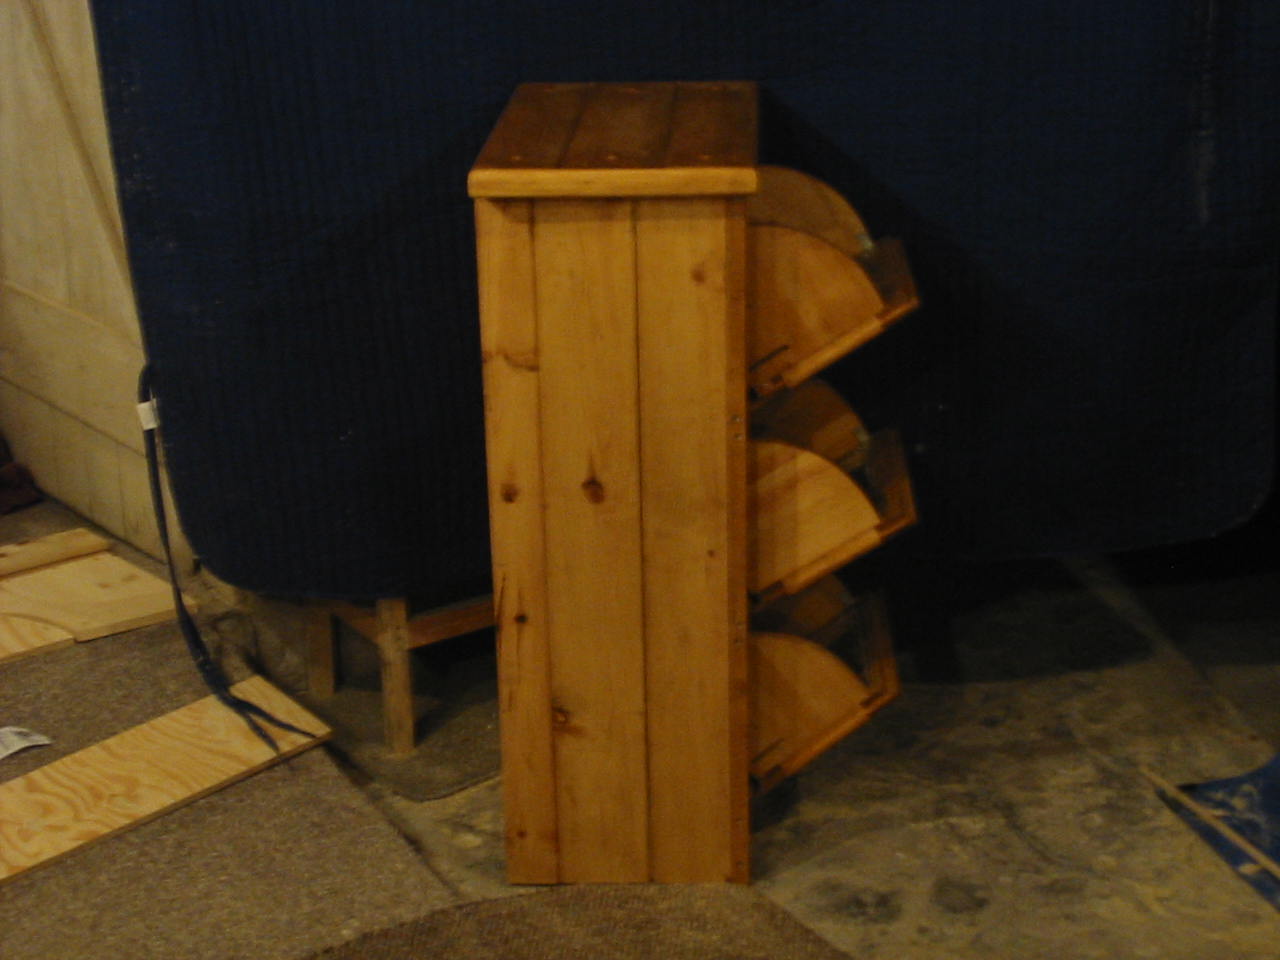 Bench - Table - Chair: Learn Woodworking plans for potato bin